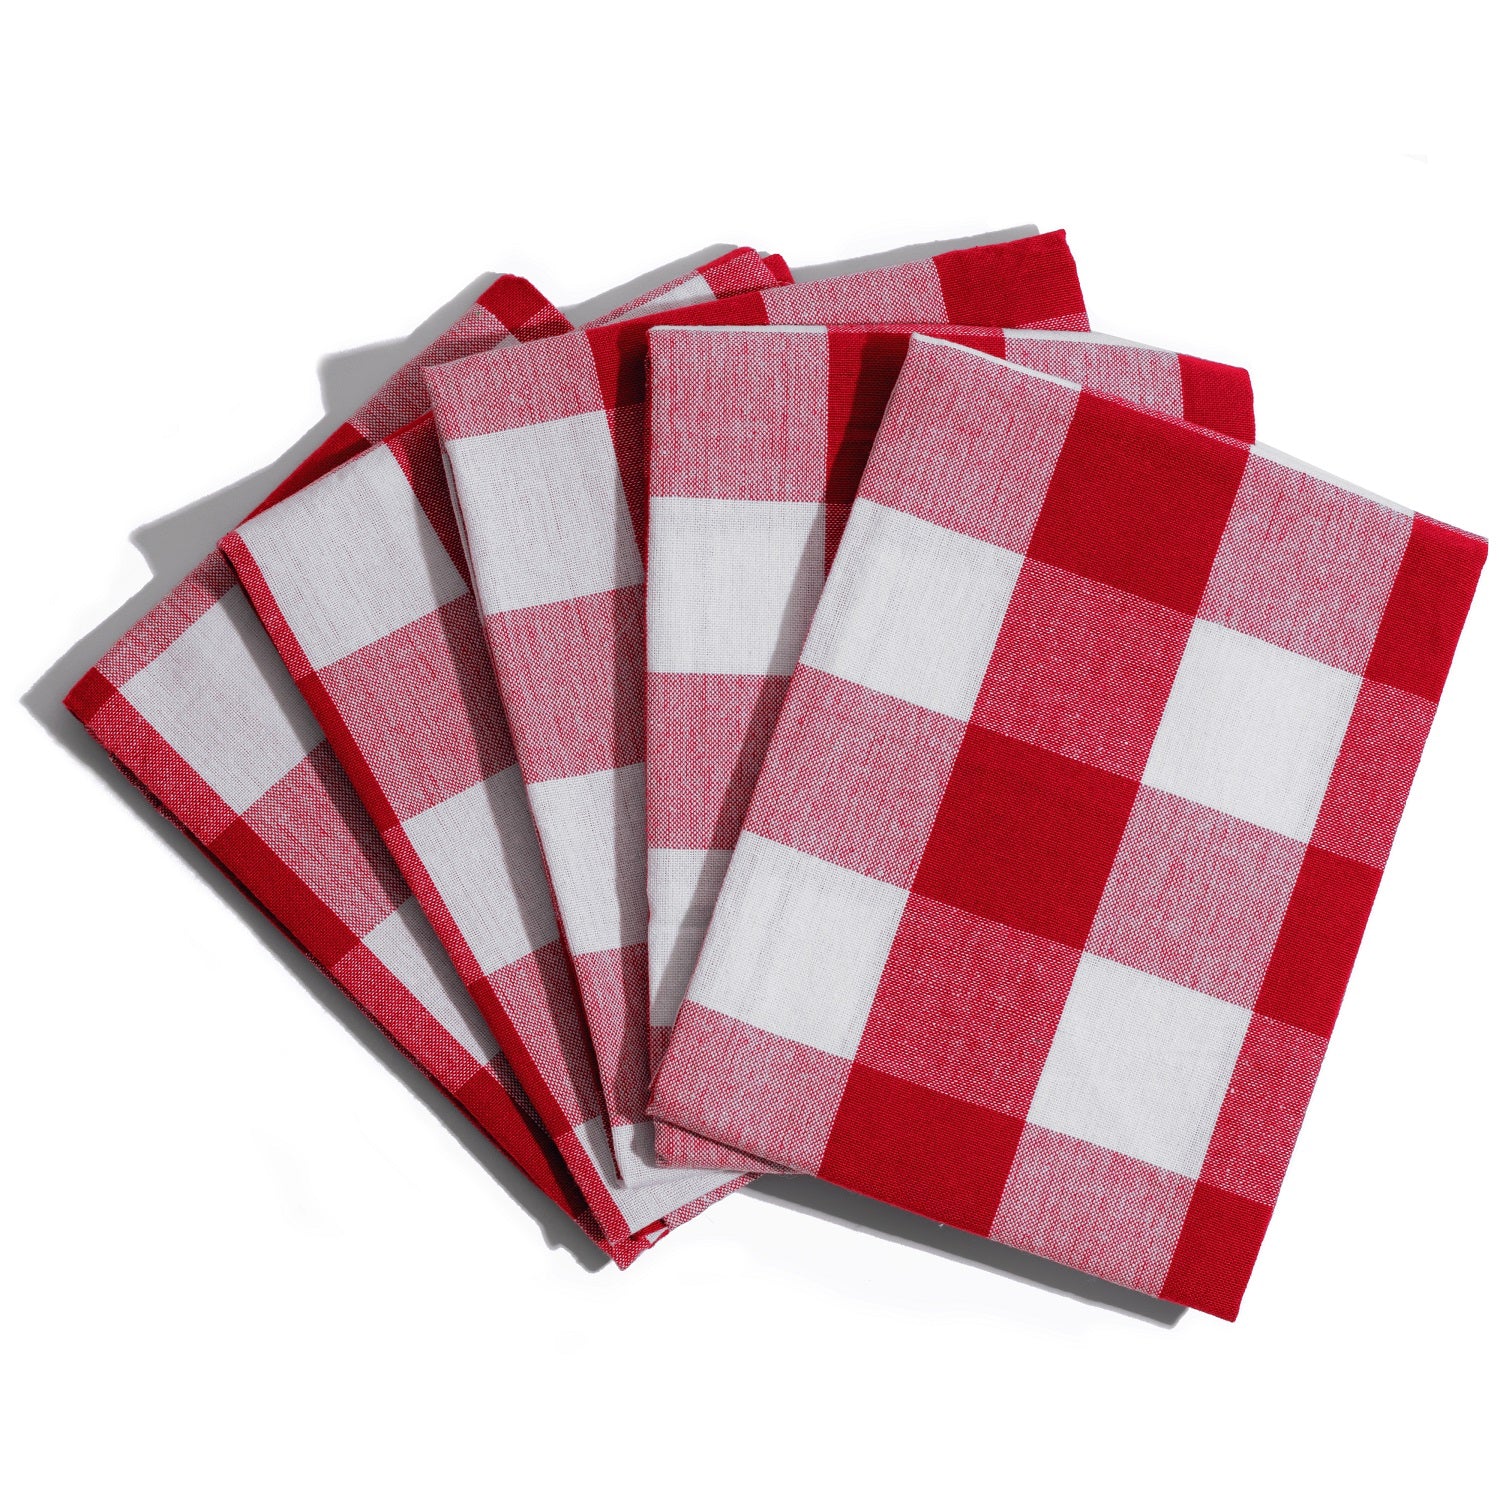  Big Red House Kitchen Towels - 6-Pack, 100% Cotton